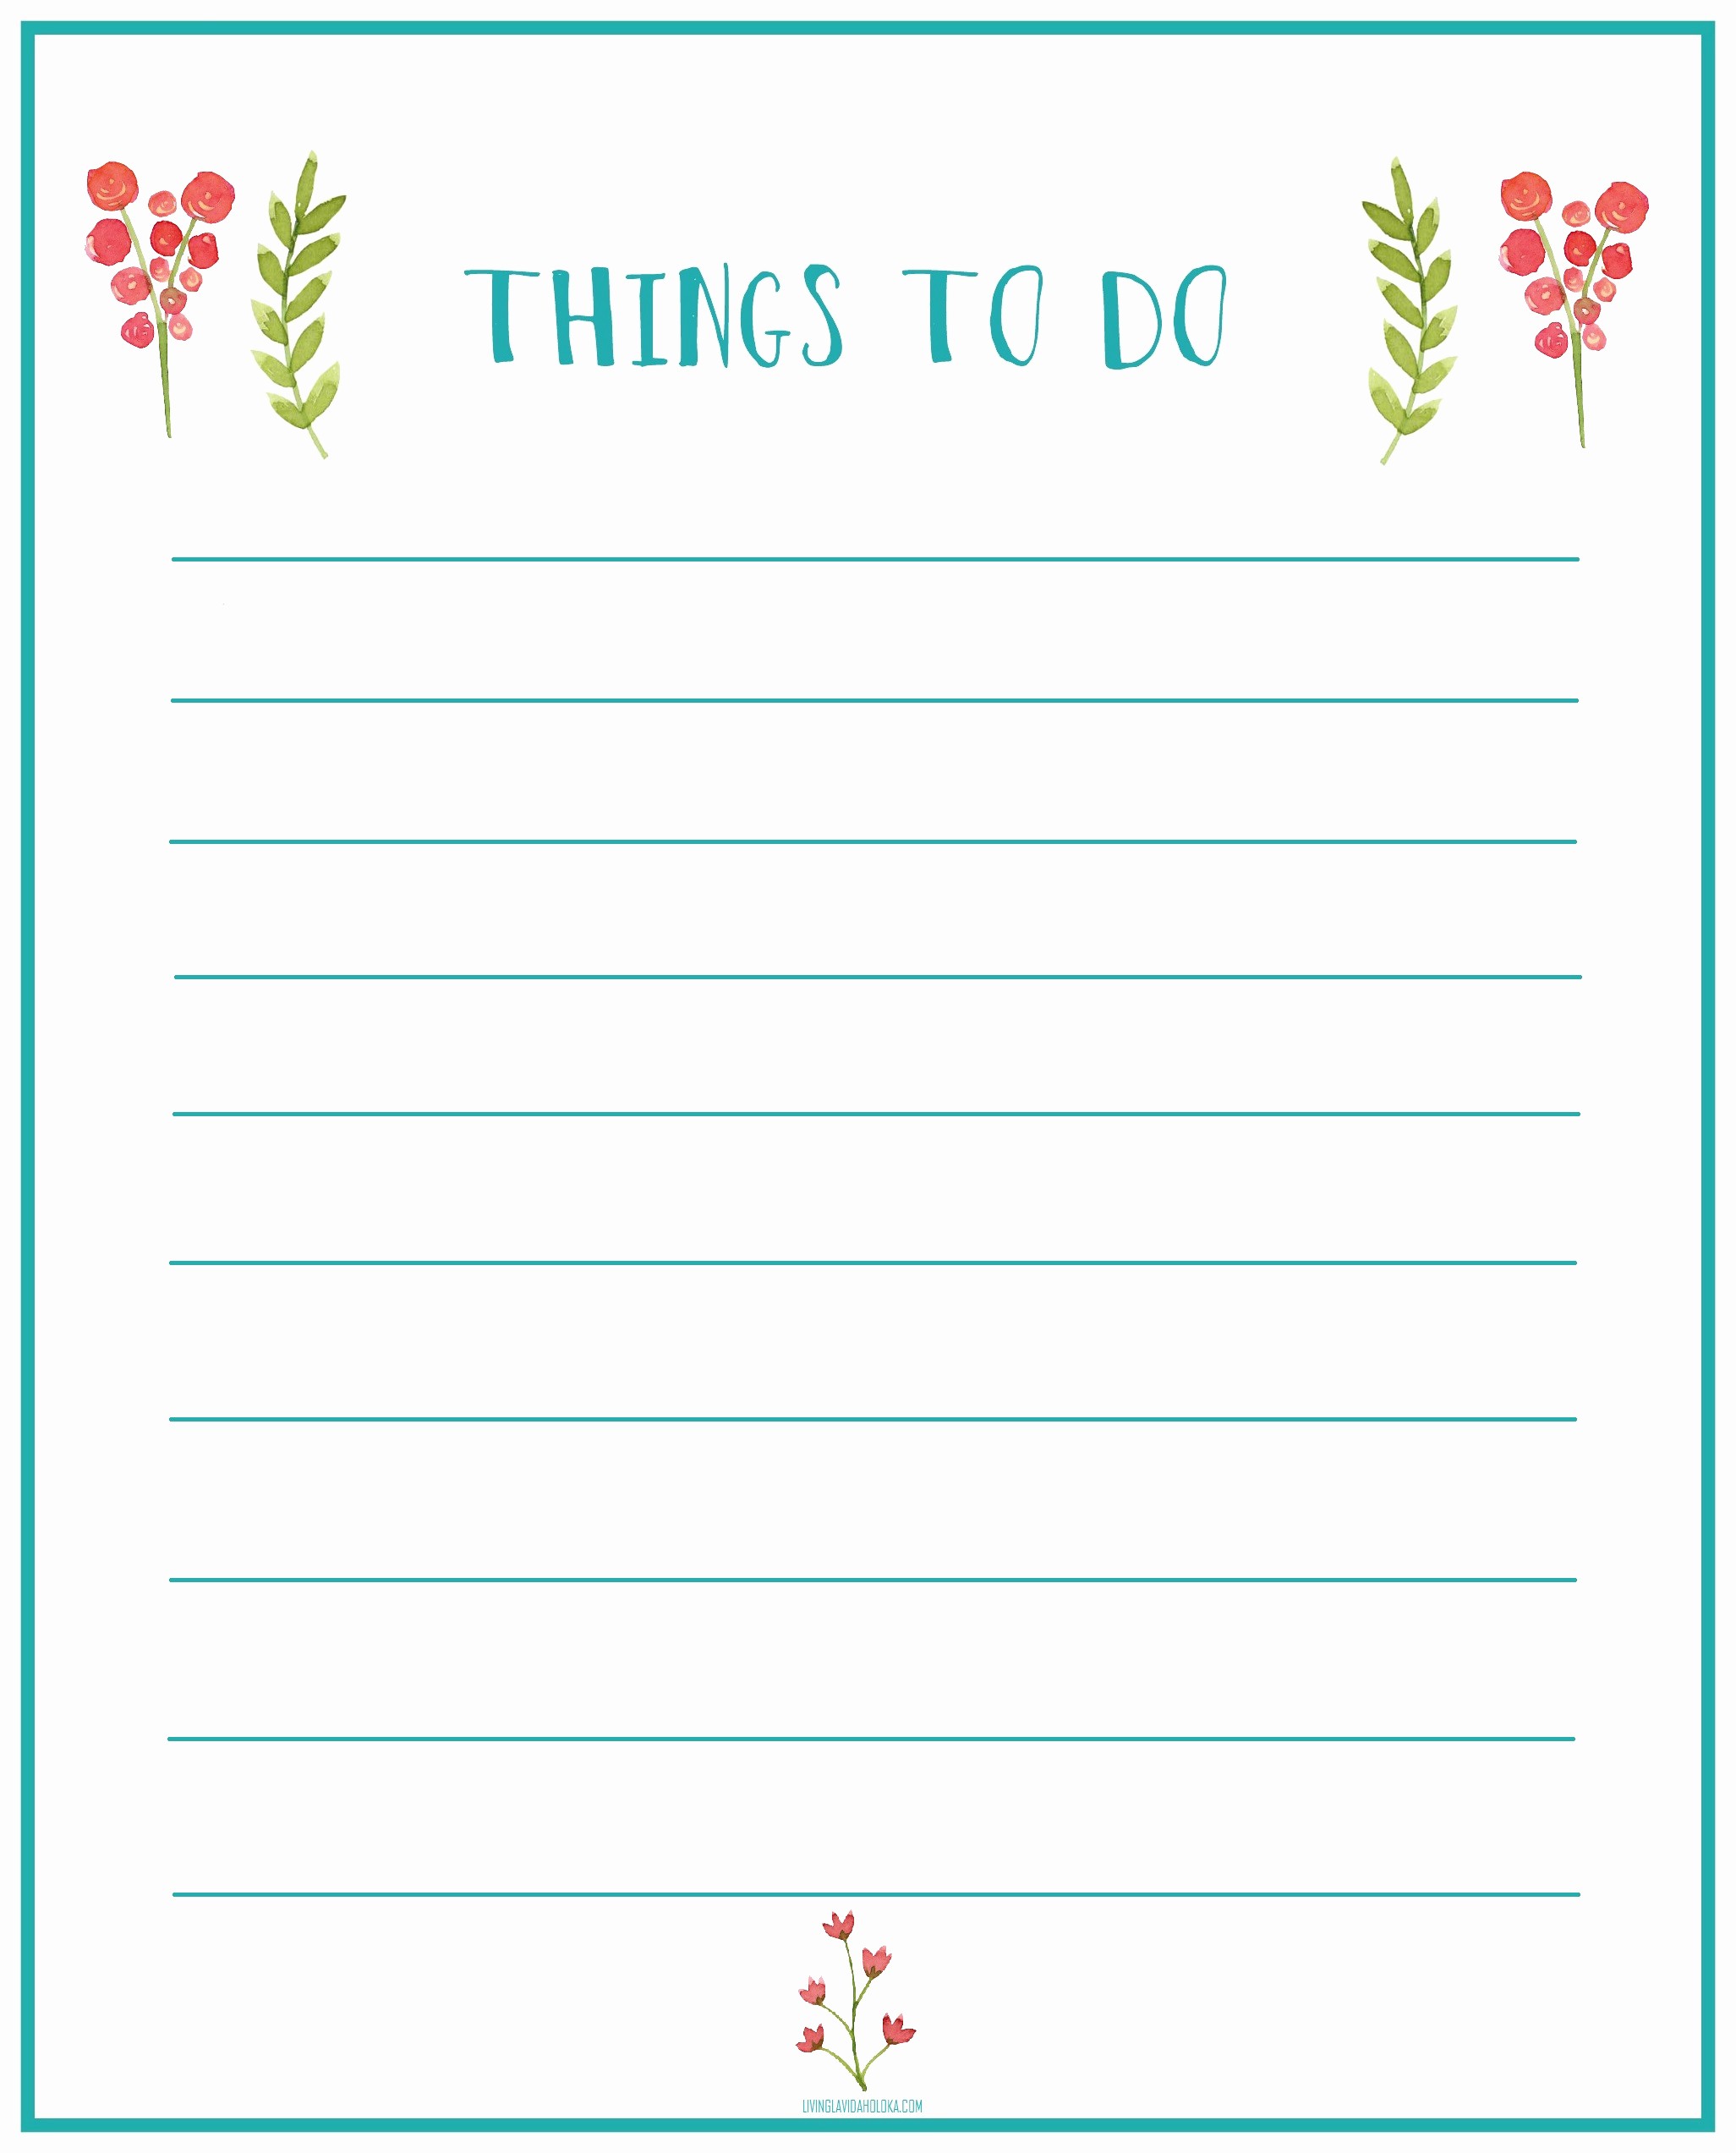 Printable Things to Do Lists Luxury Home Fice Update Things to Do Printable Living La